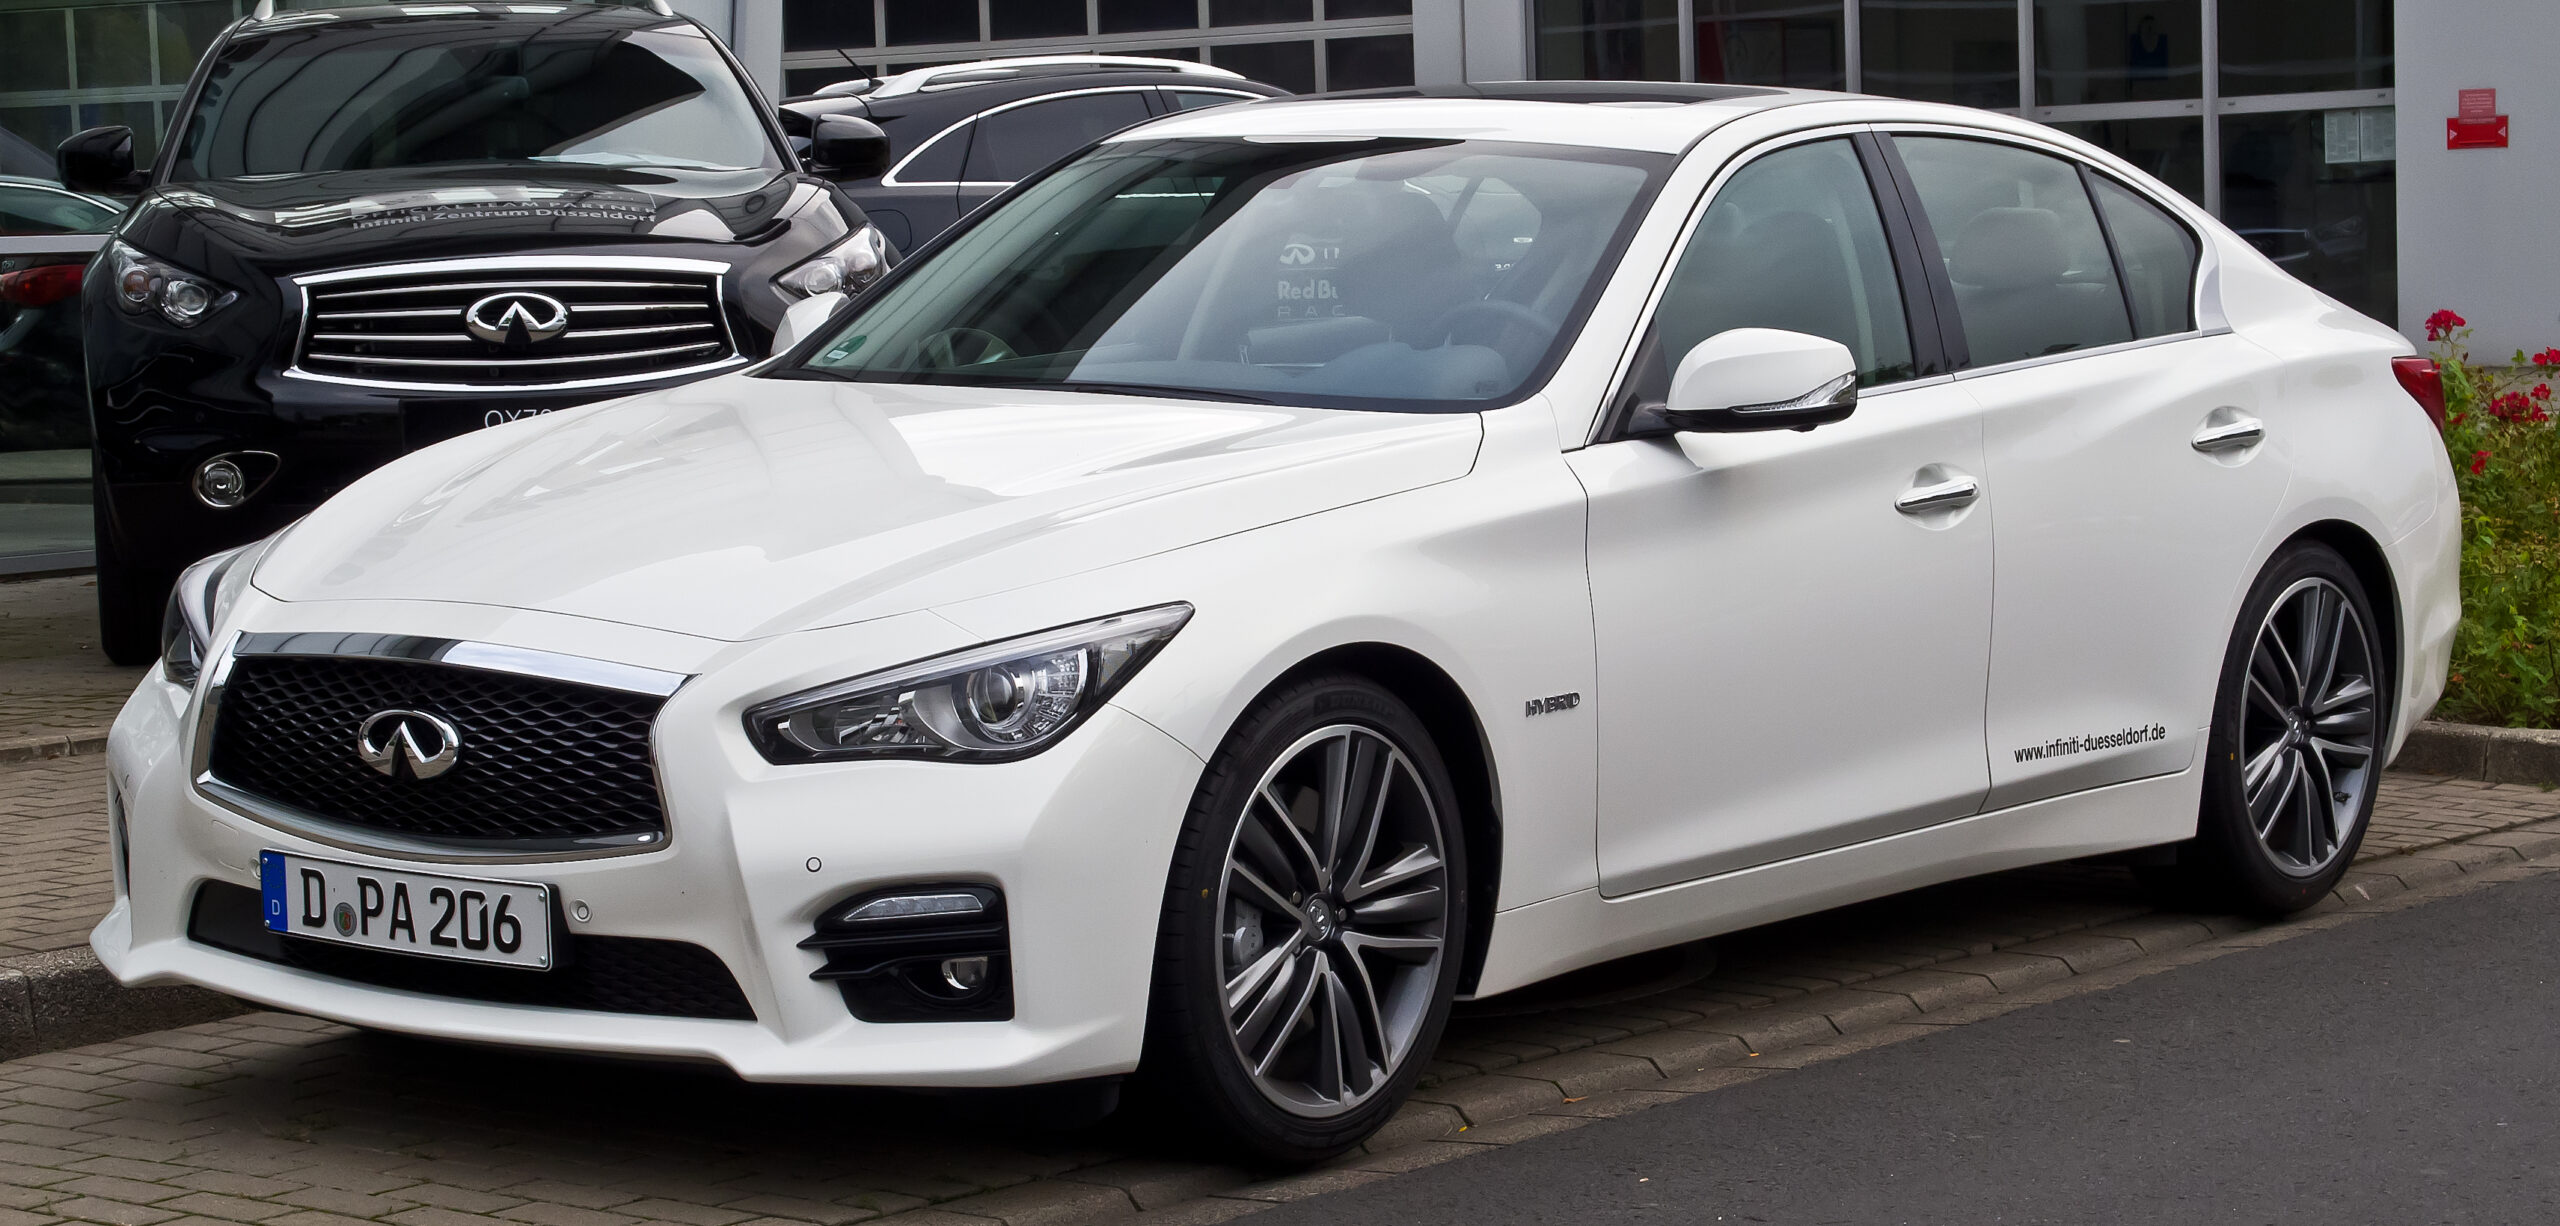 What Is Infiniti Q50 Turbo Replacement Cost? – Full Coverage!